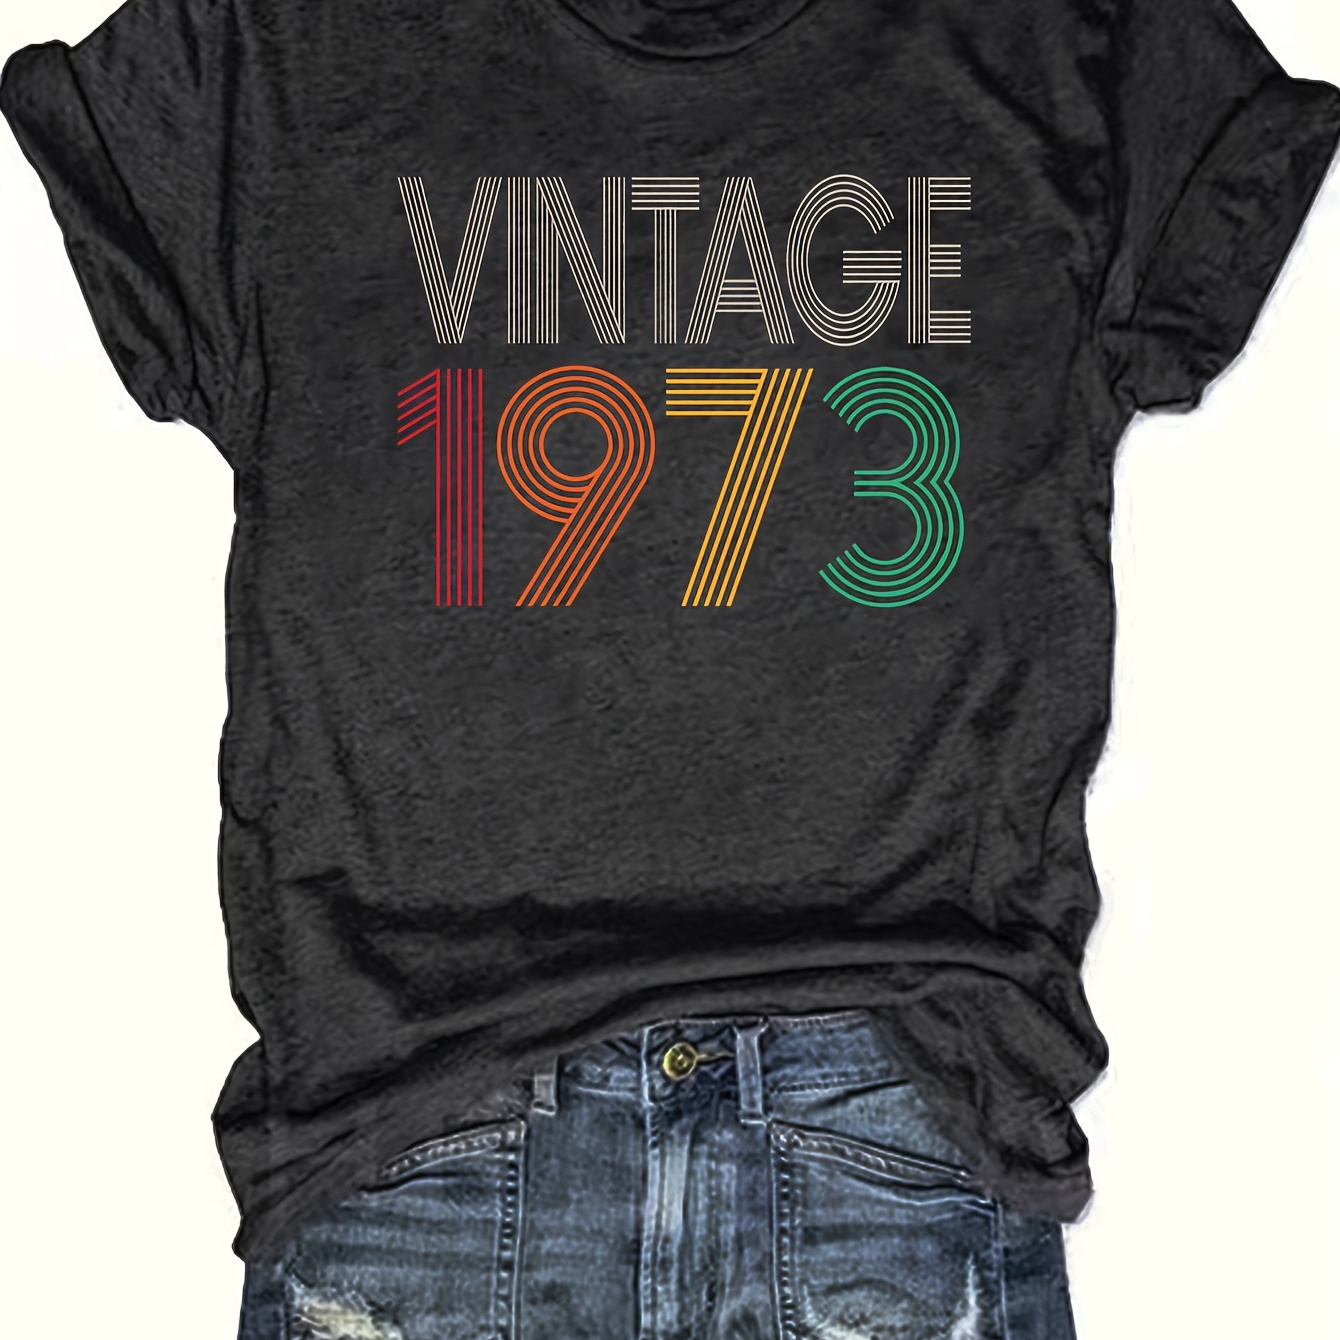 

Vintage 1973 Print T-shirt, Casual Crew Neck Short Sleeve Daily Top, Women's Clothing